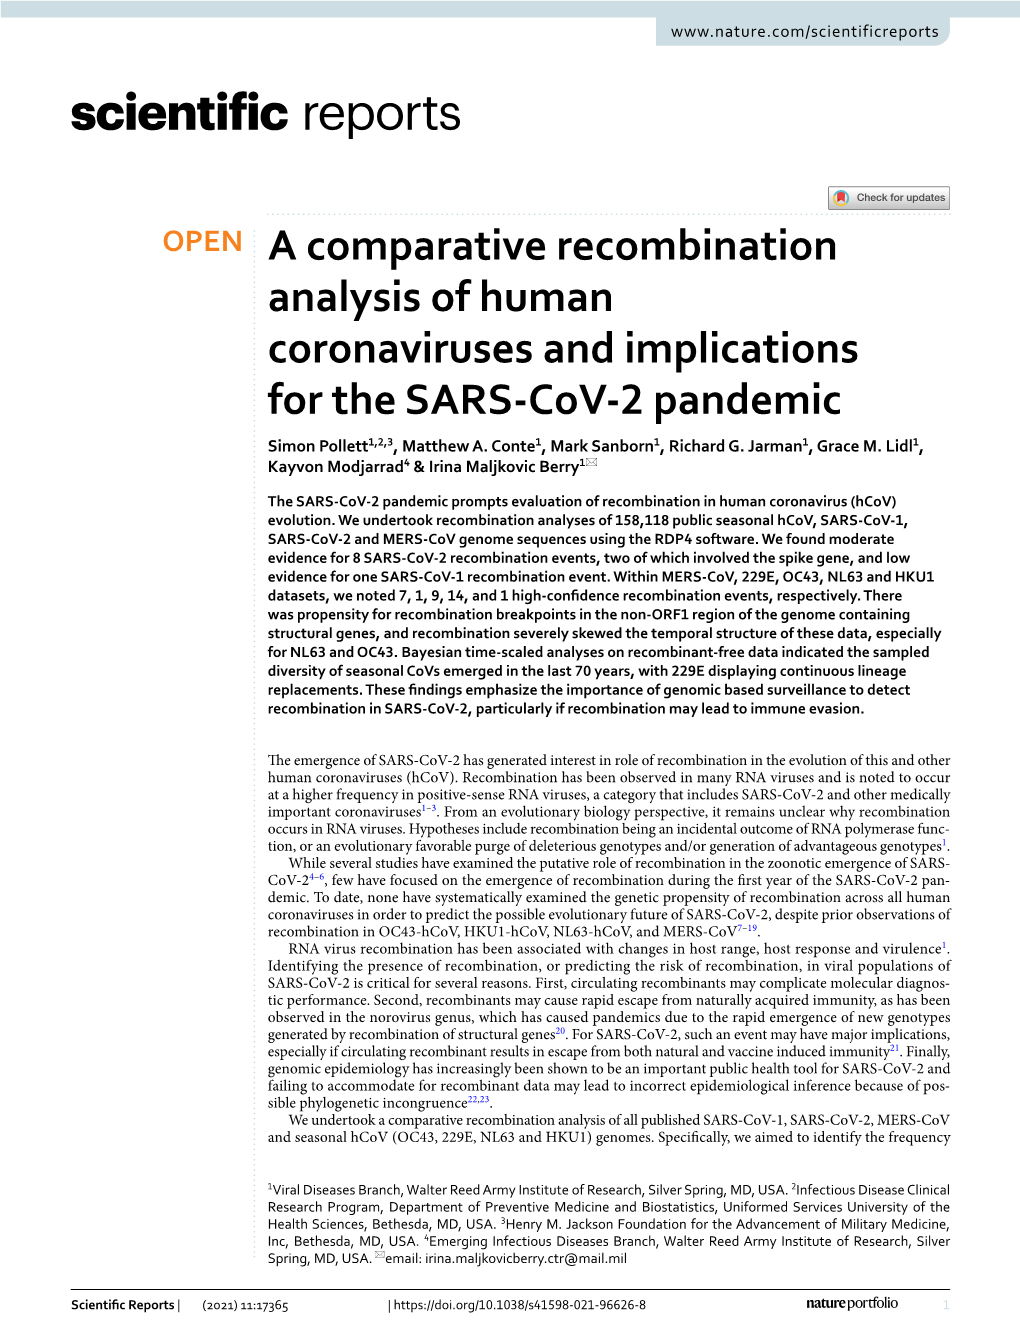 A Comparative Recombination Analysis of Human Coronaviruses and Implications for the SARS‑Cov‑2 Pandemic Simon Pollett1,2,3, Matthew A